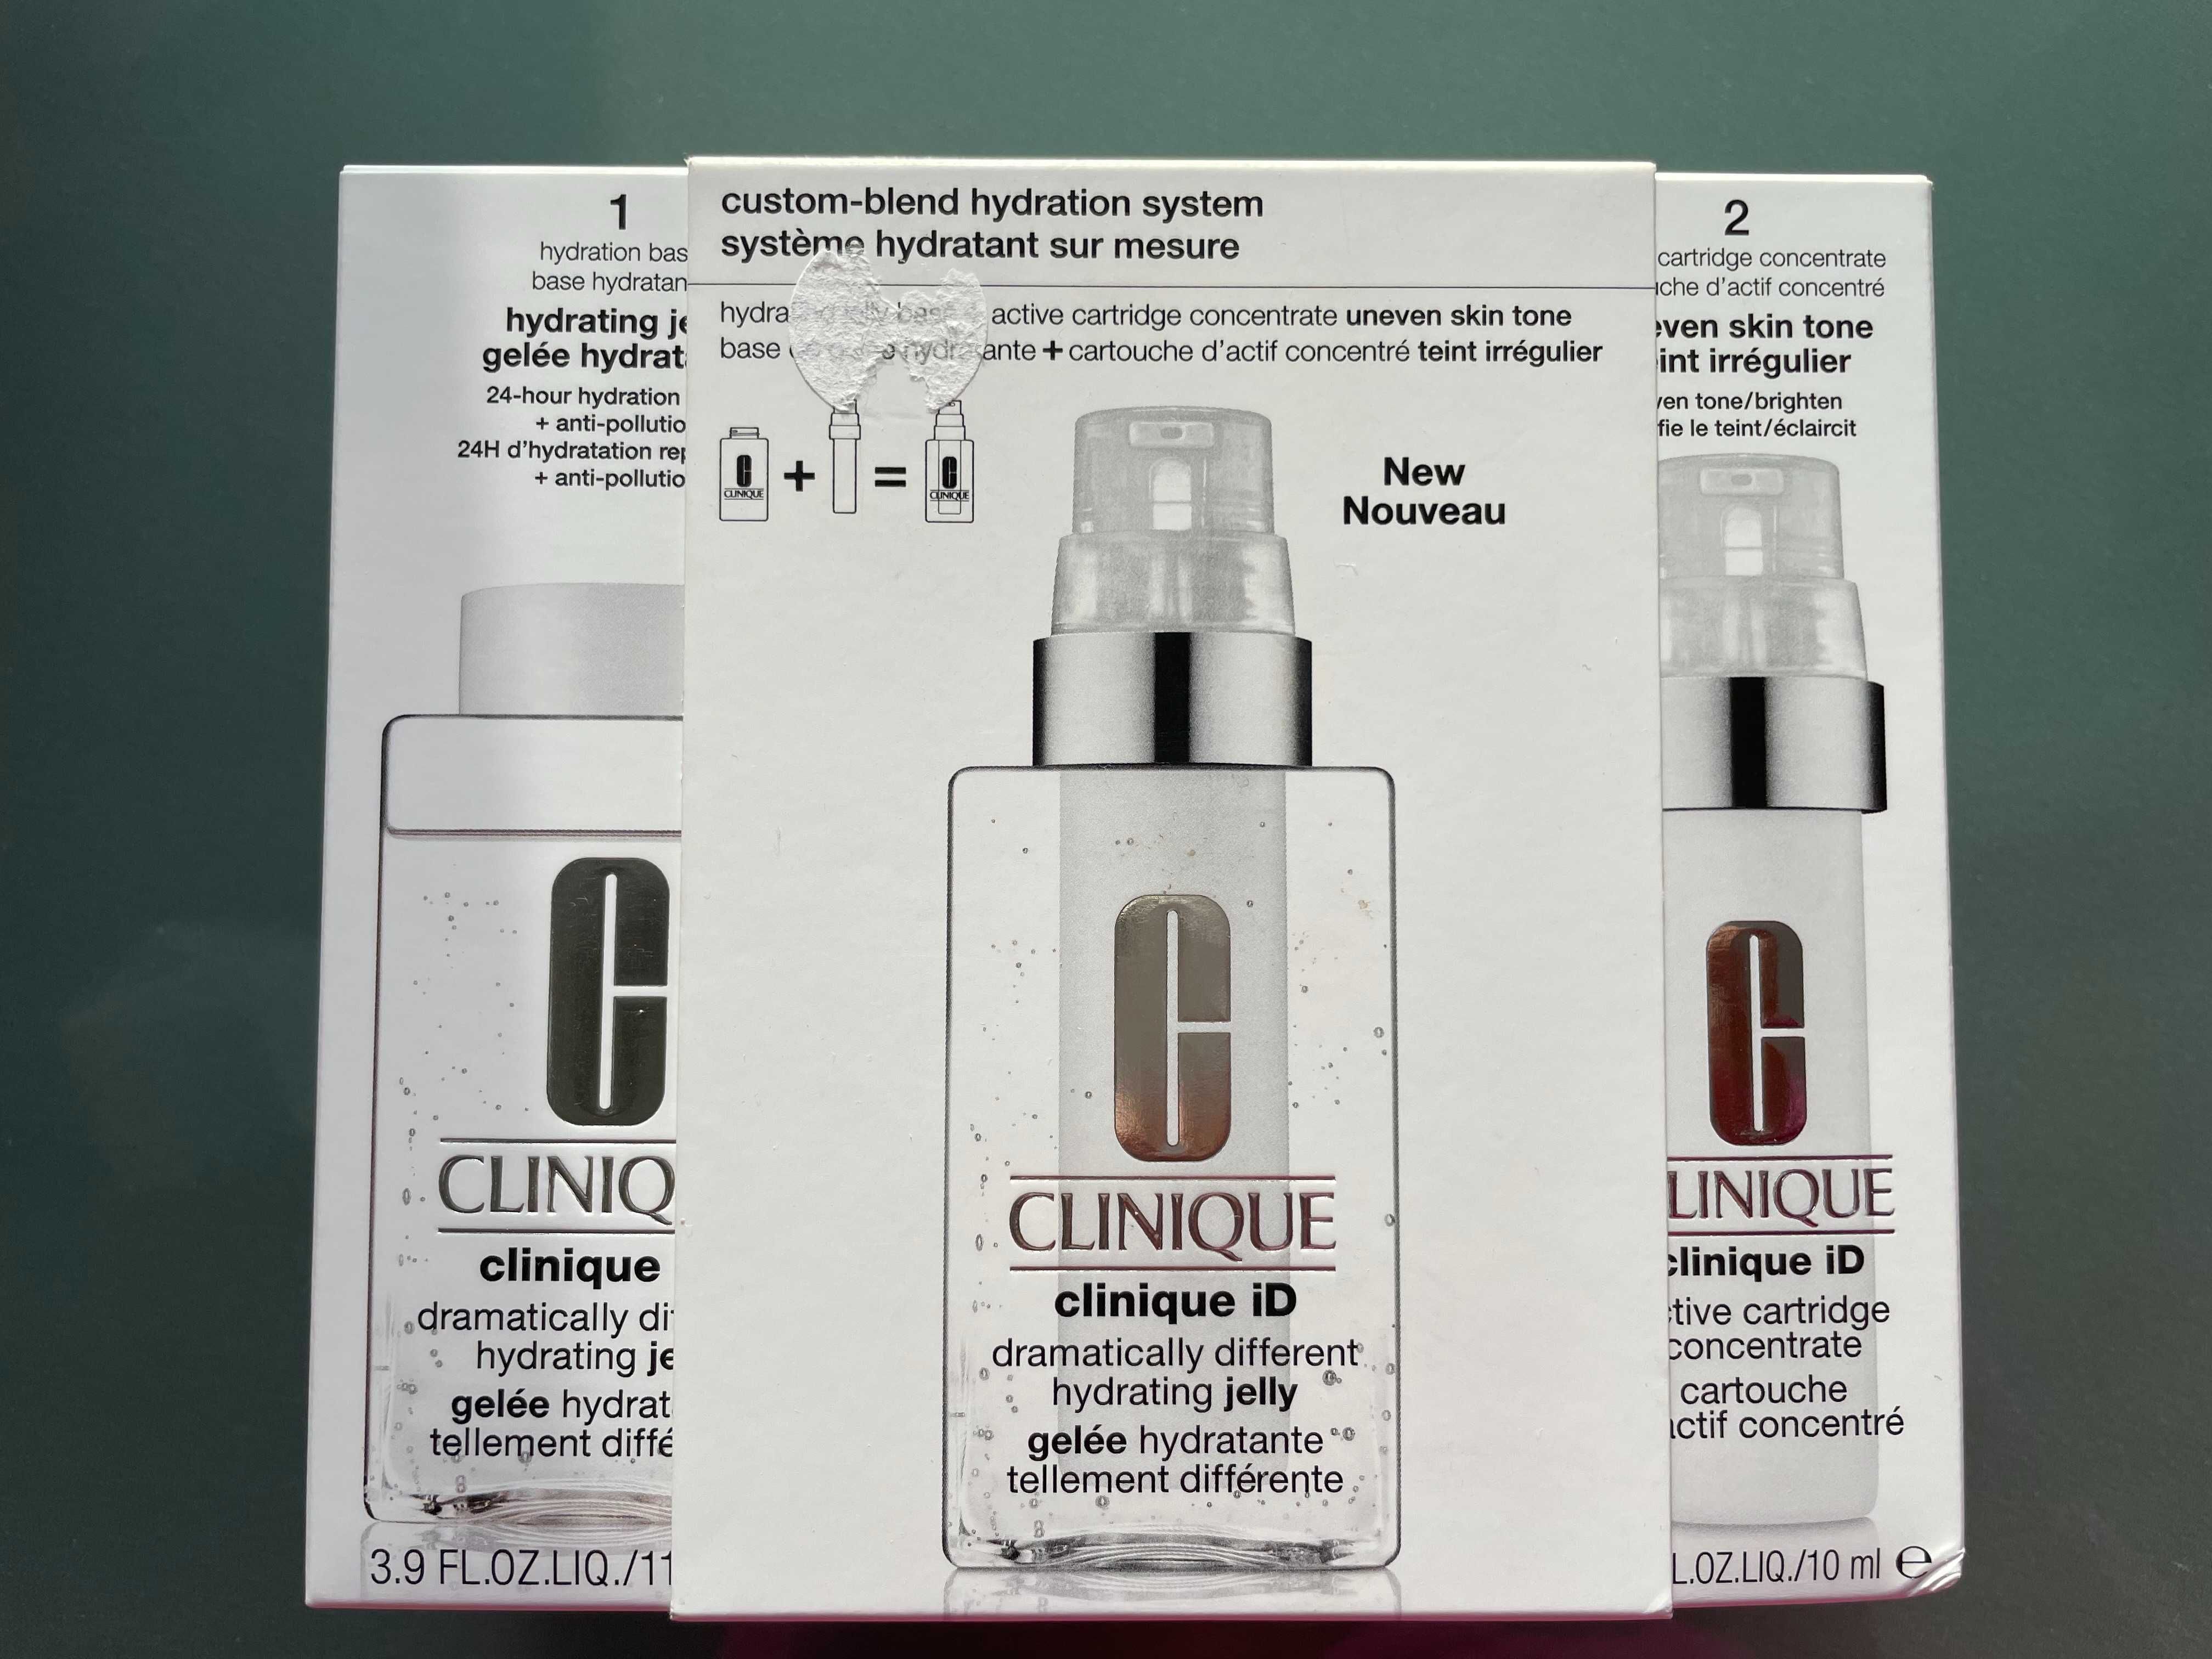 CLINIQUE ID  dramatically hydrating jelly 115 ml  + active concentrate